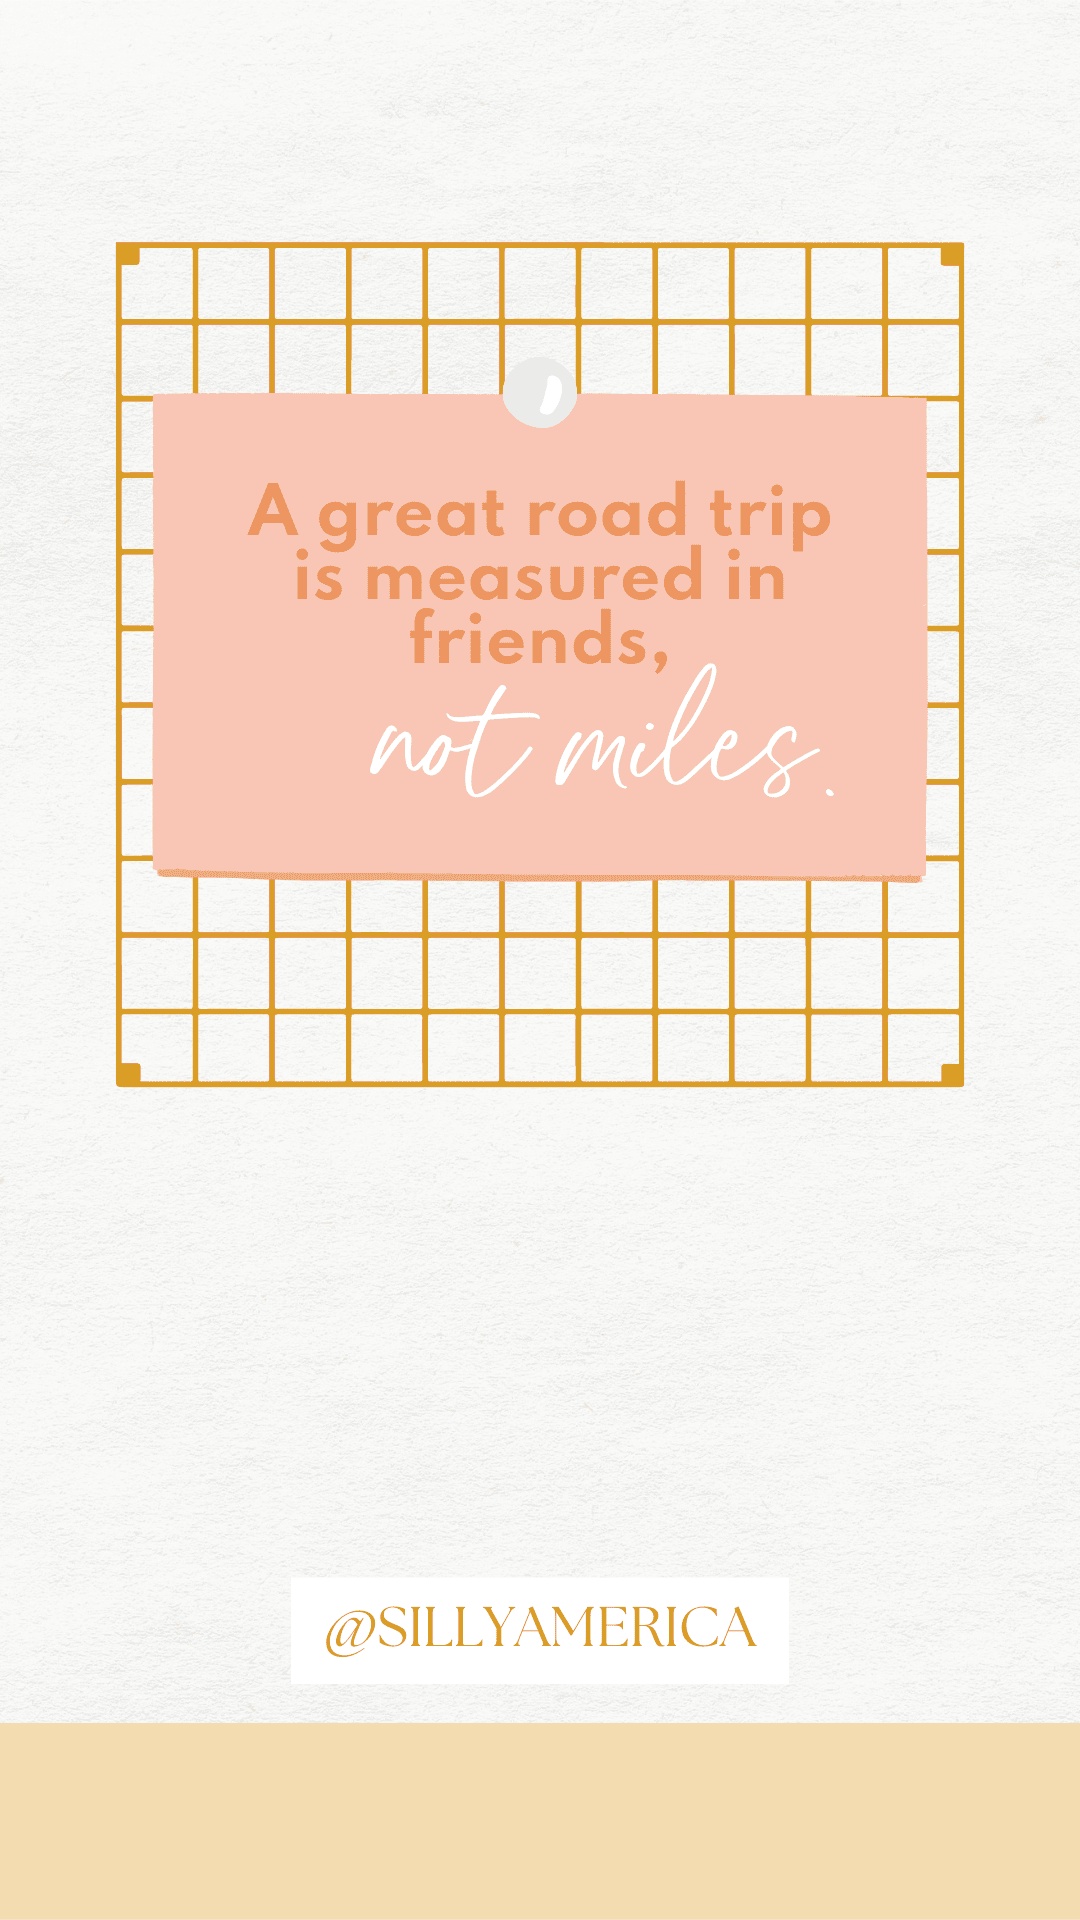 A great road trip is measured in friends, not miles. - Road Trip Captions for Instagram